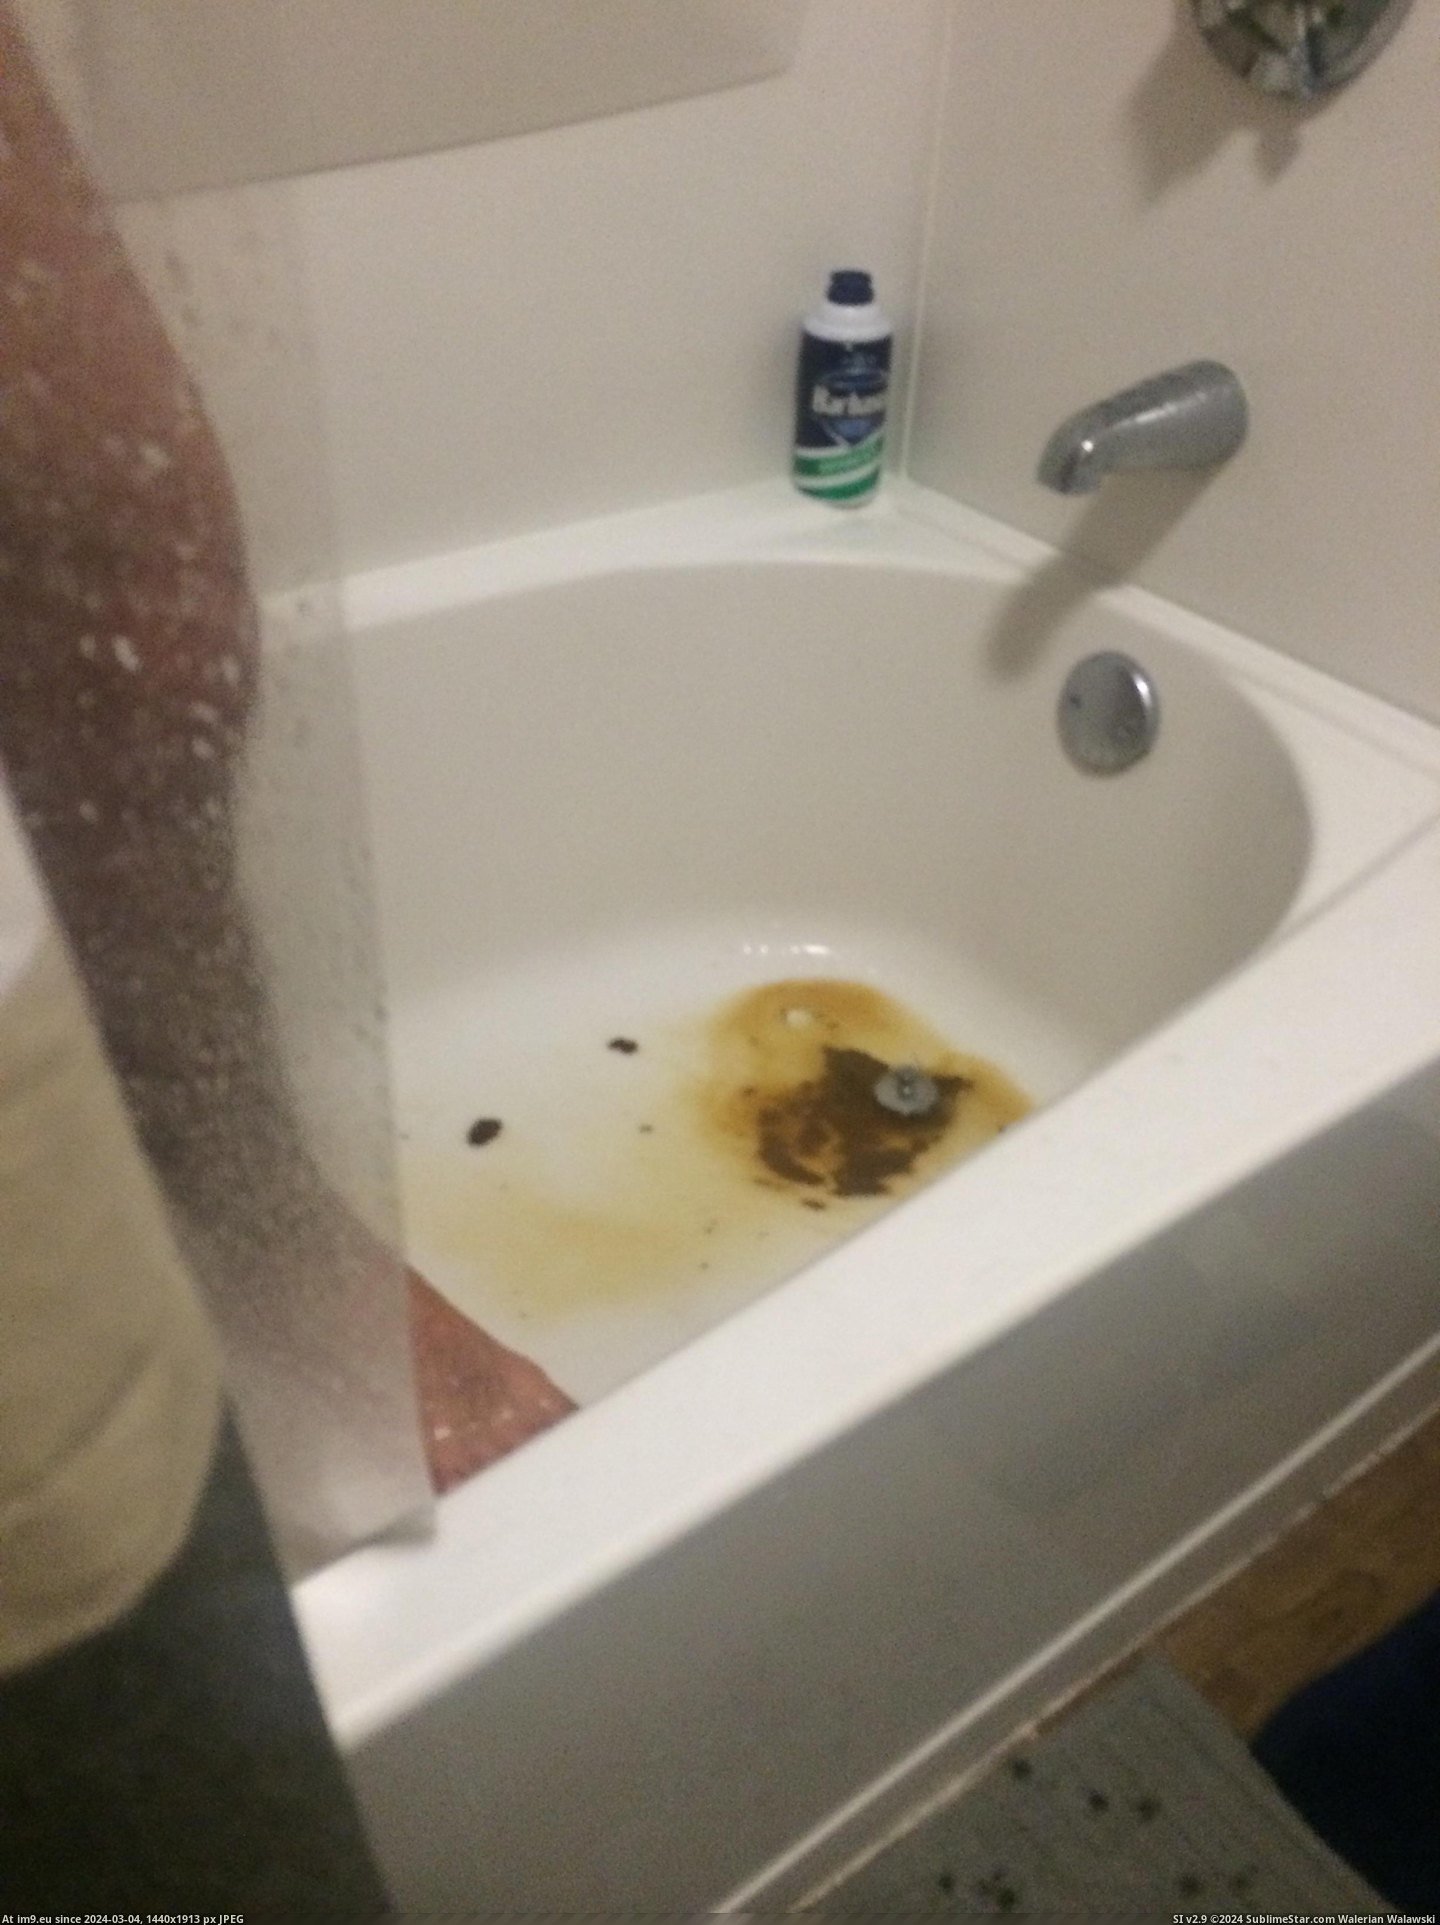 #Wtf #Shower #Shit #Sober #Roomate #Drain #Pushed #Purpose [Wtf] Roomate took a shit in the shower and pushed it down the drain. On purpose. Sober. Pic. (Изображение из альбом My r/WTF favs))